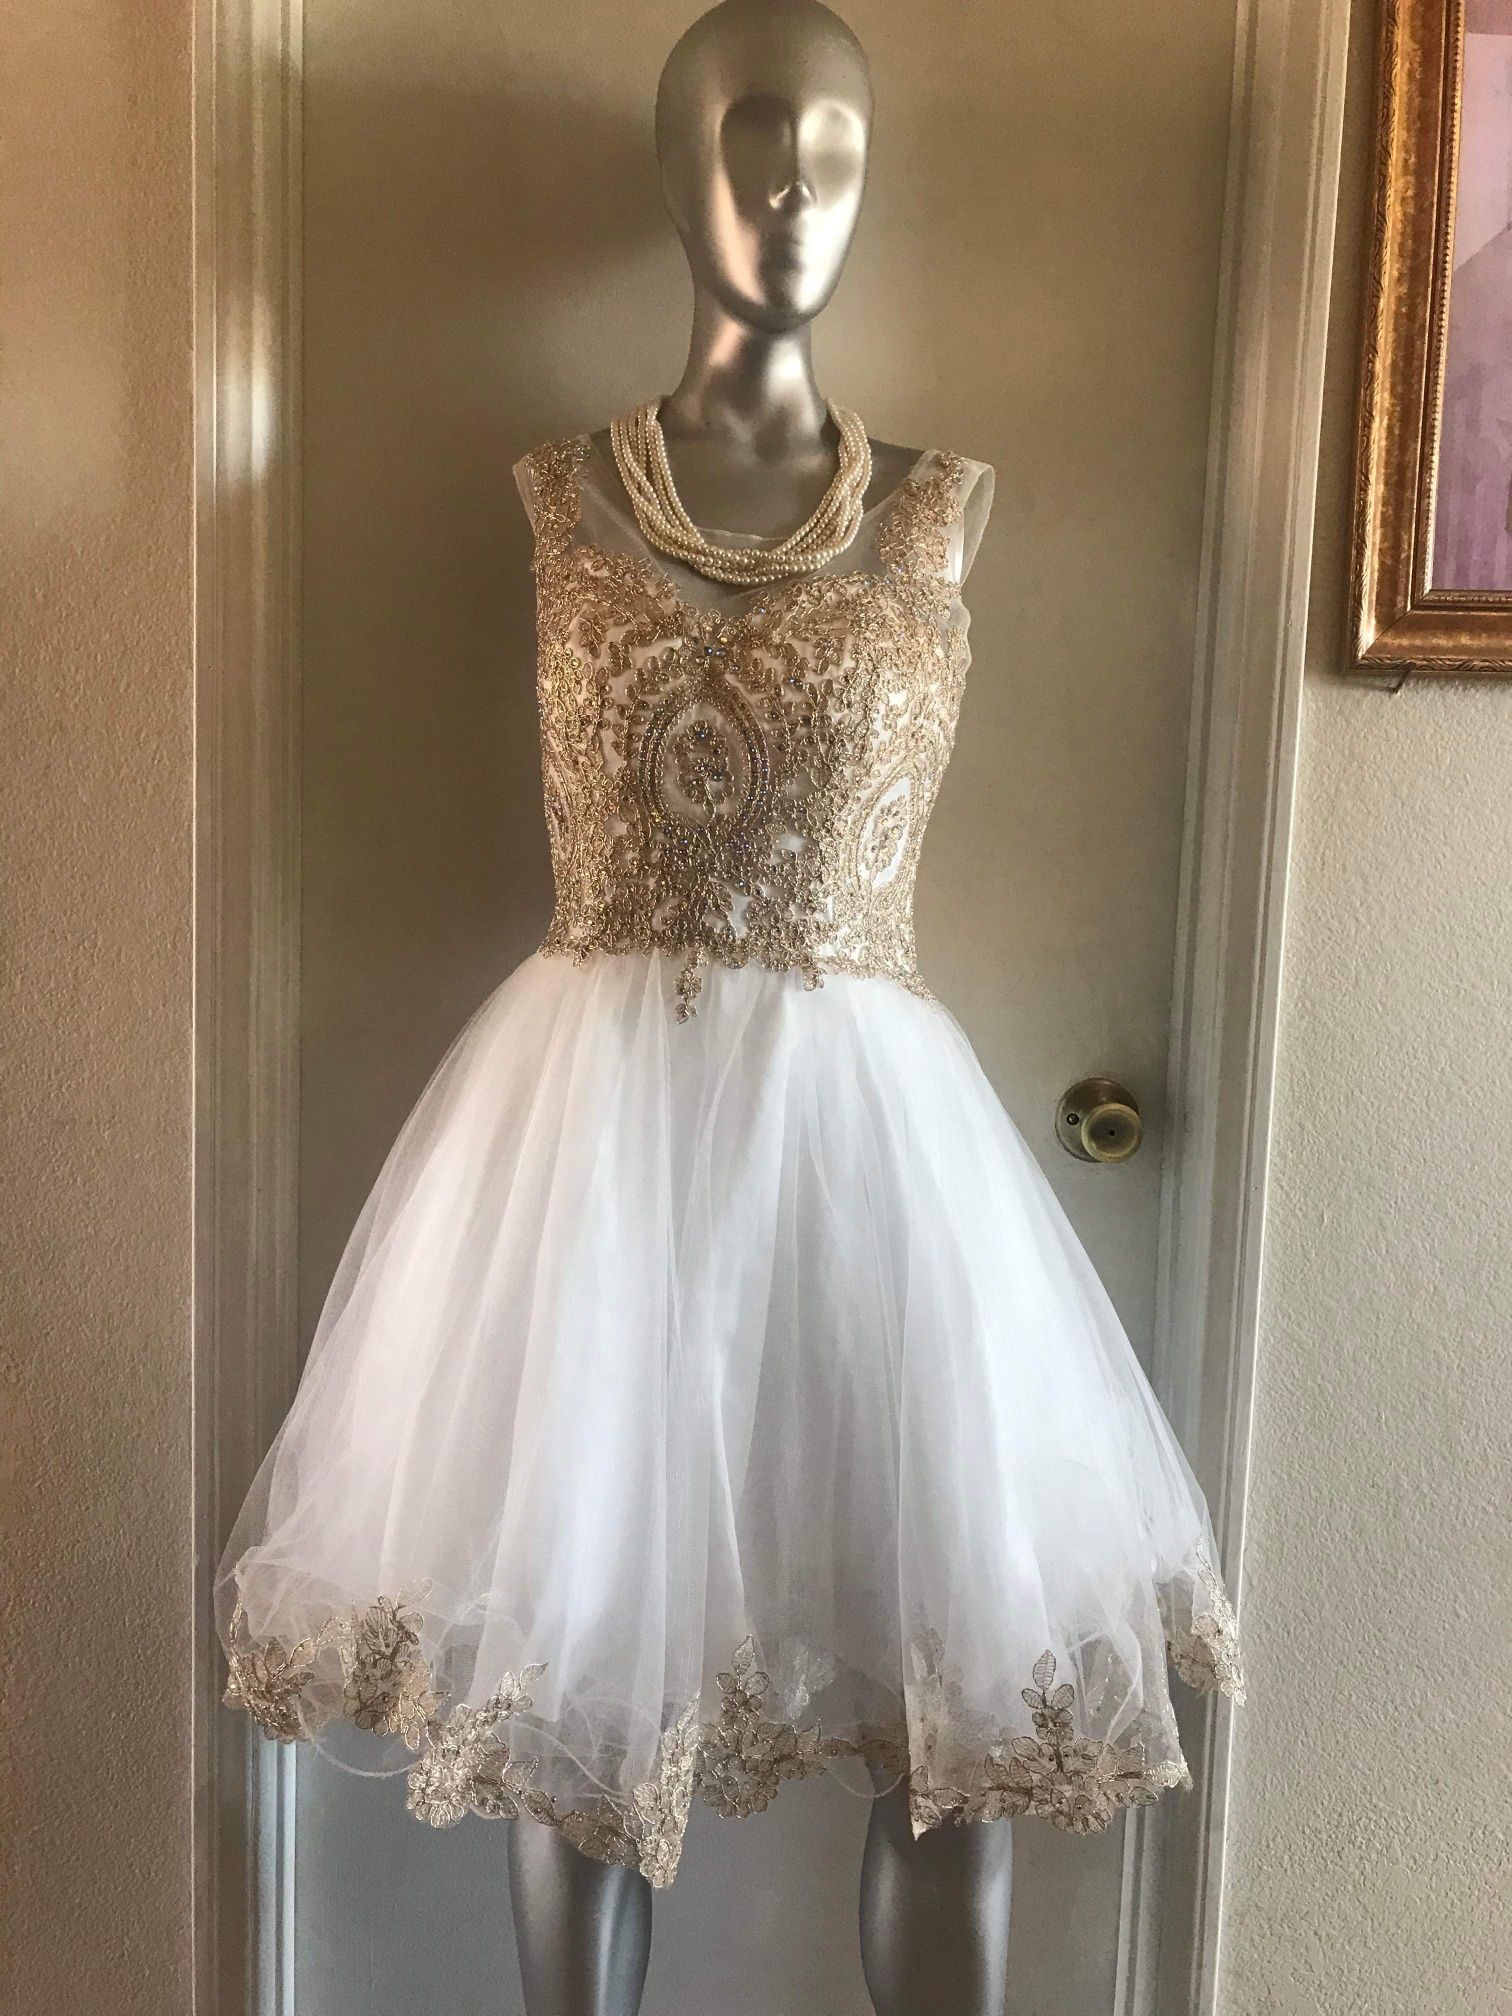 Woman’s Gold And White Dress